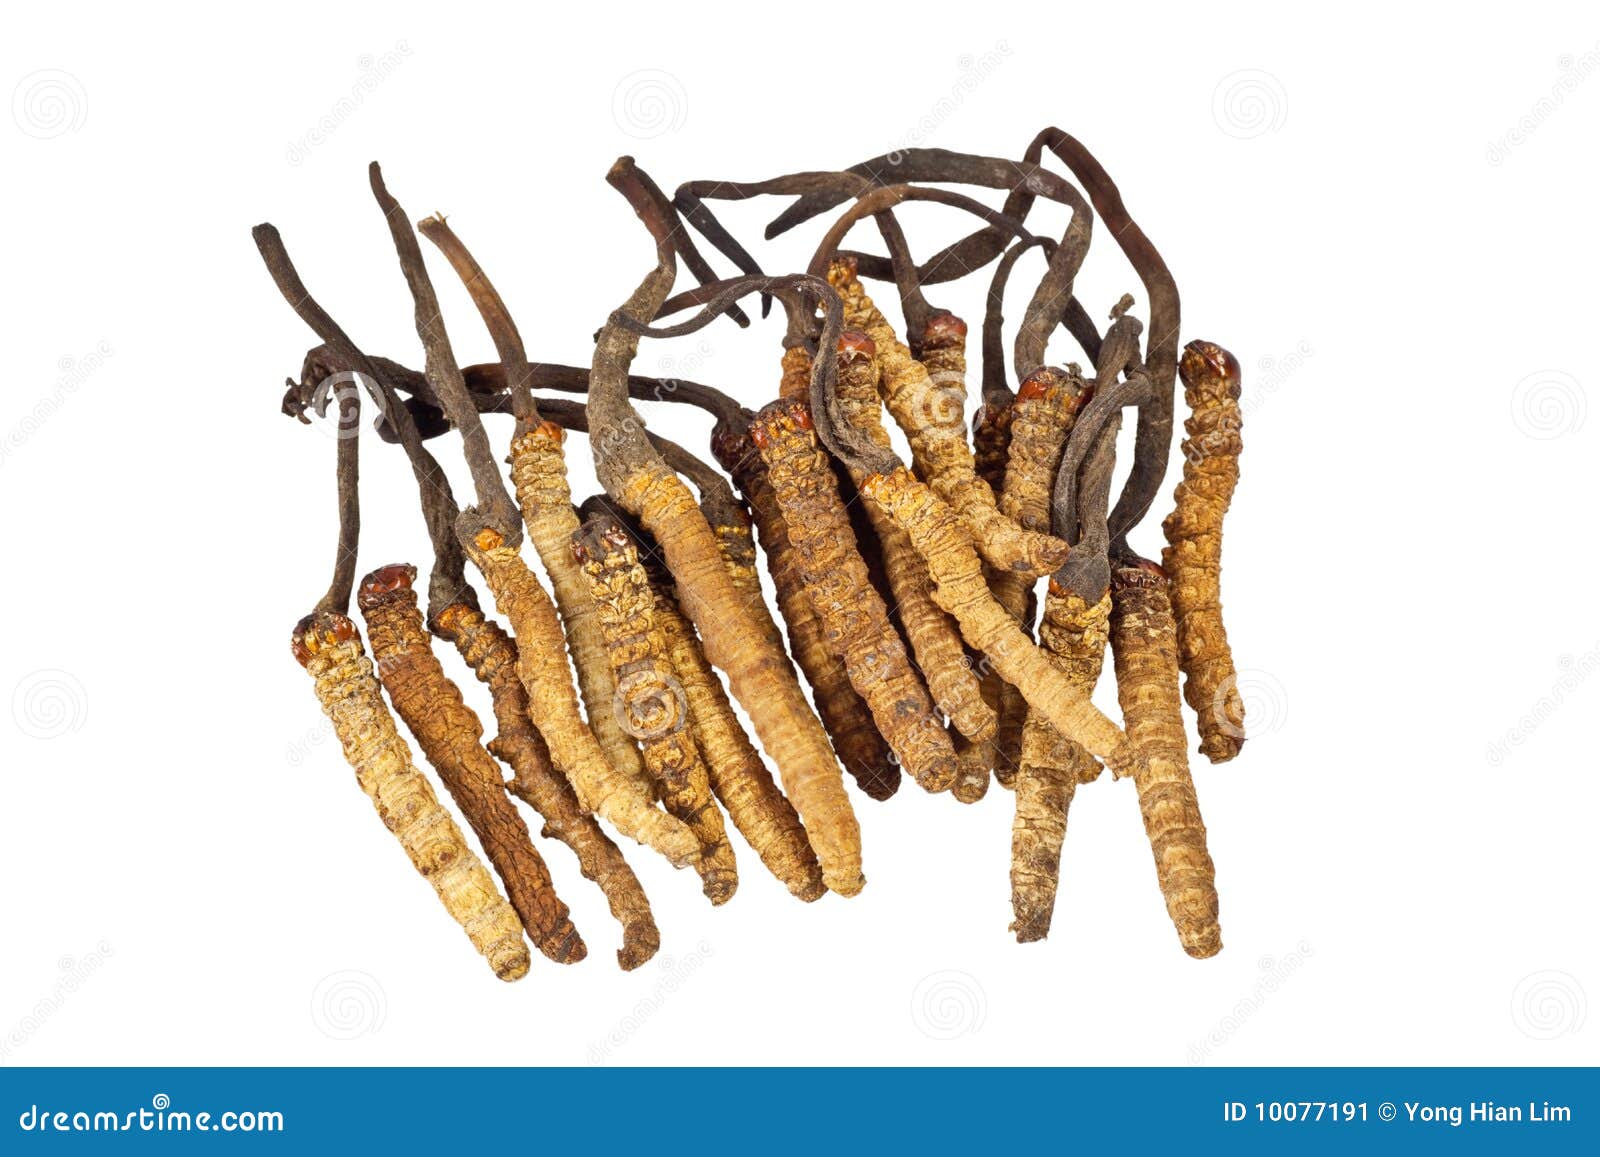 traditional chinese medicine - cordyceps sinensis